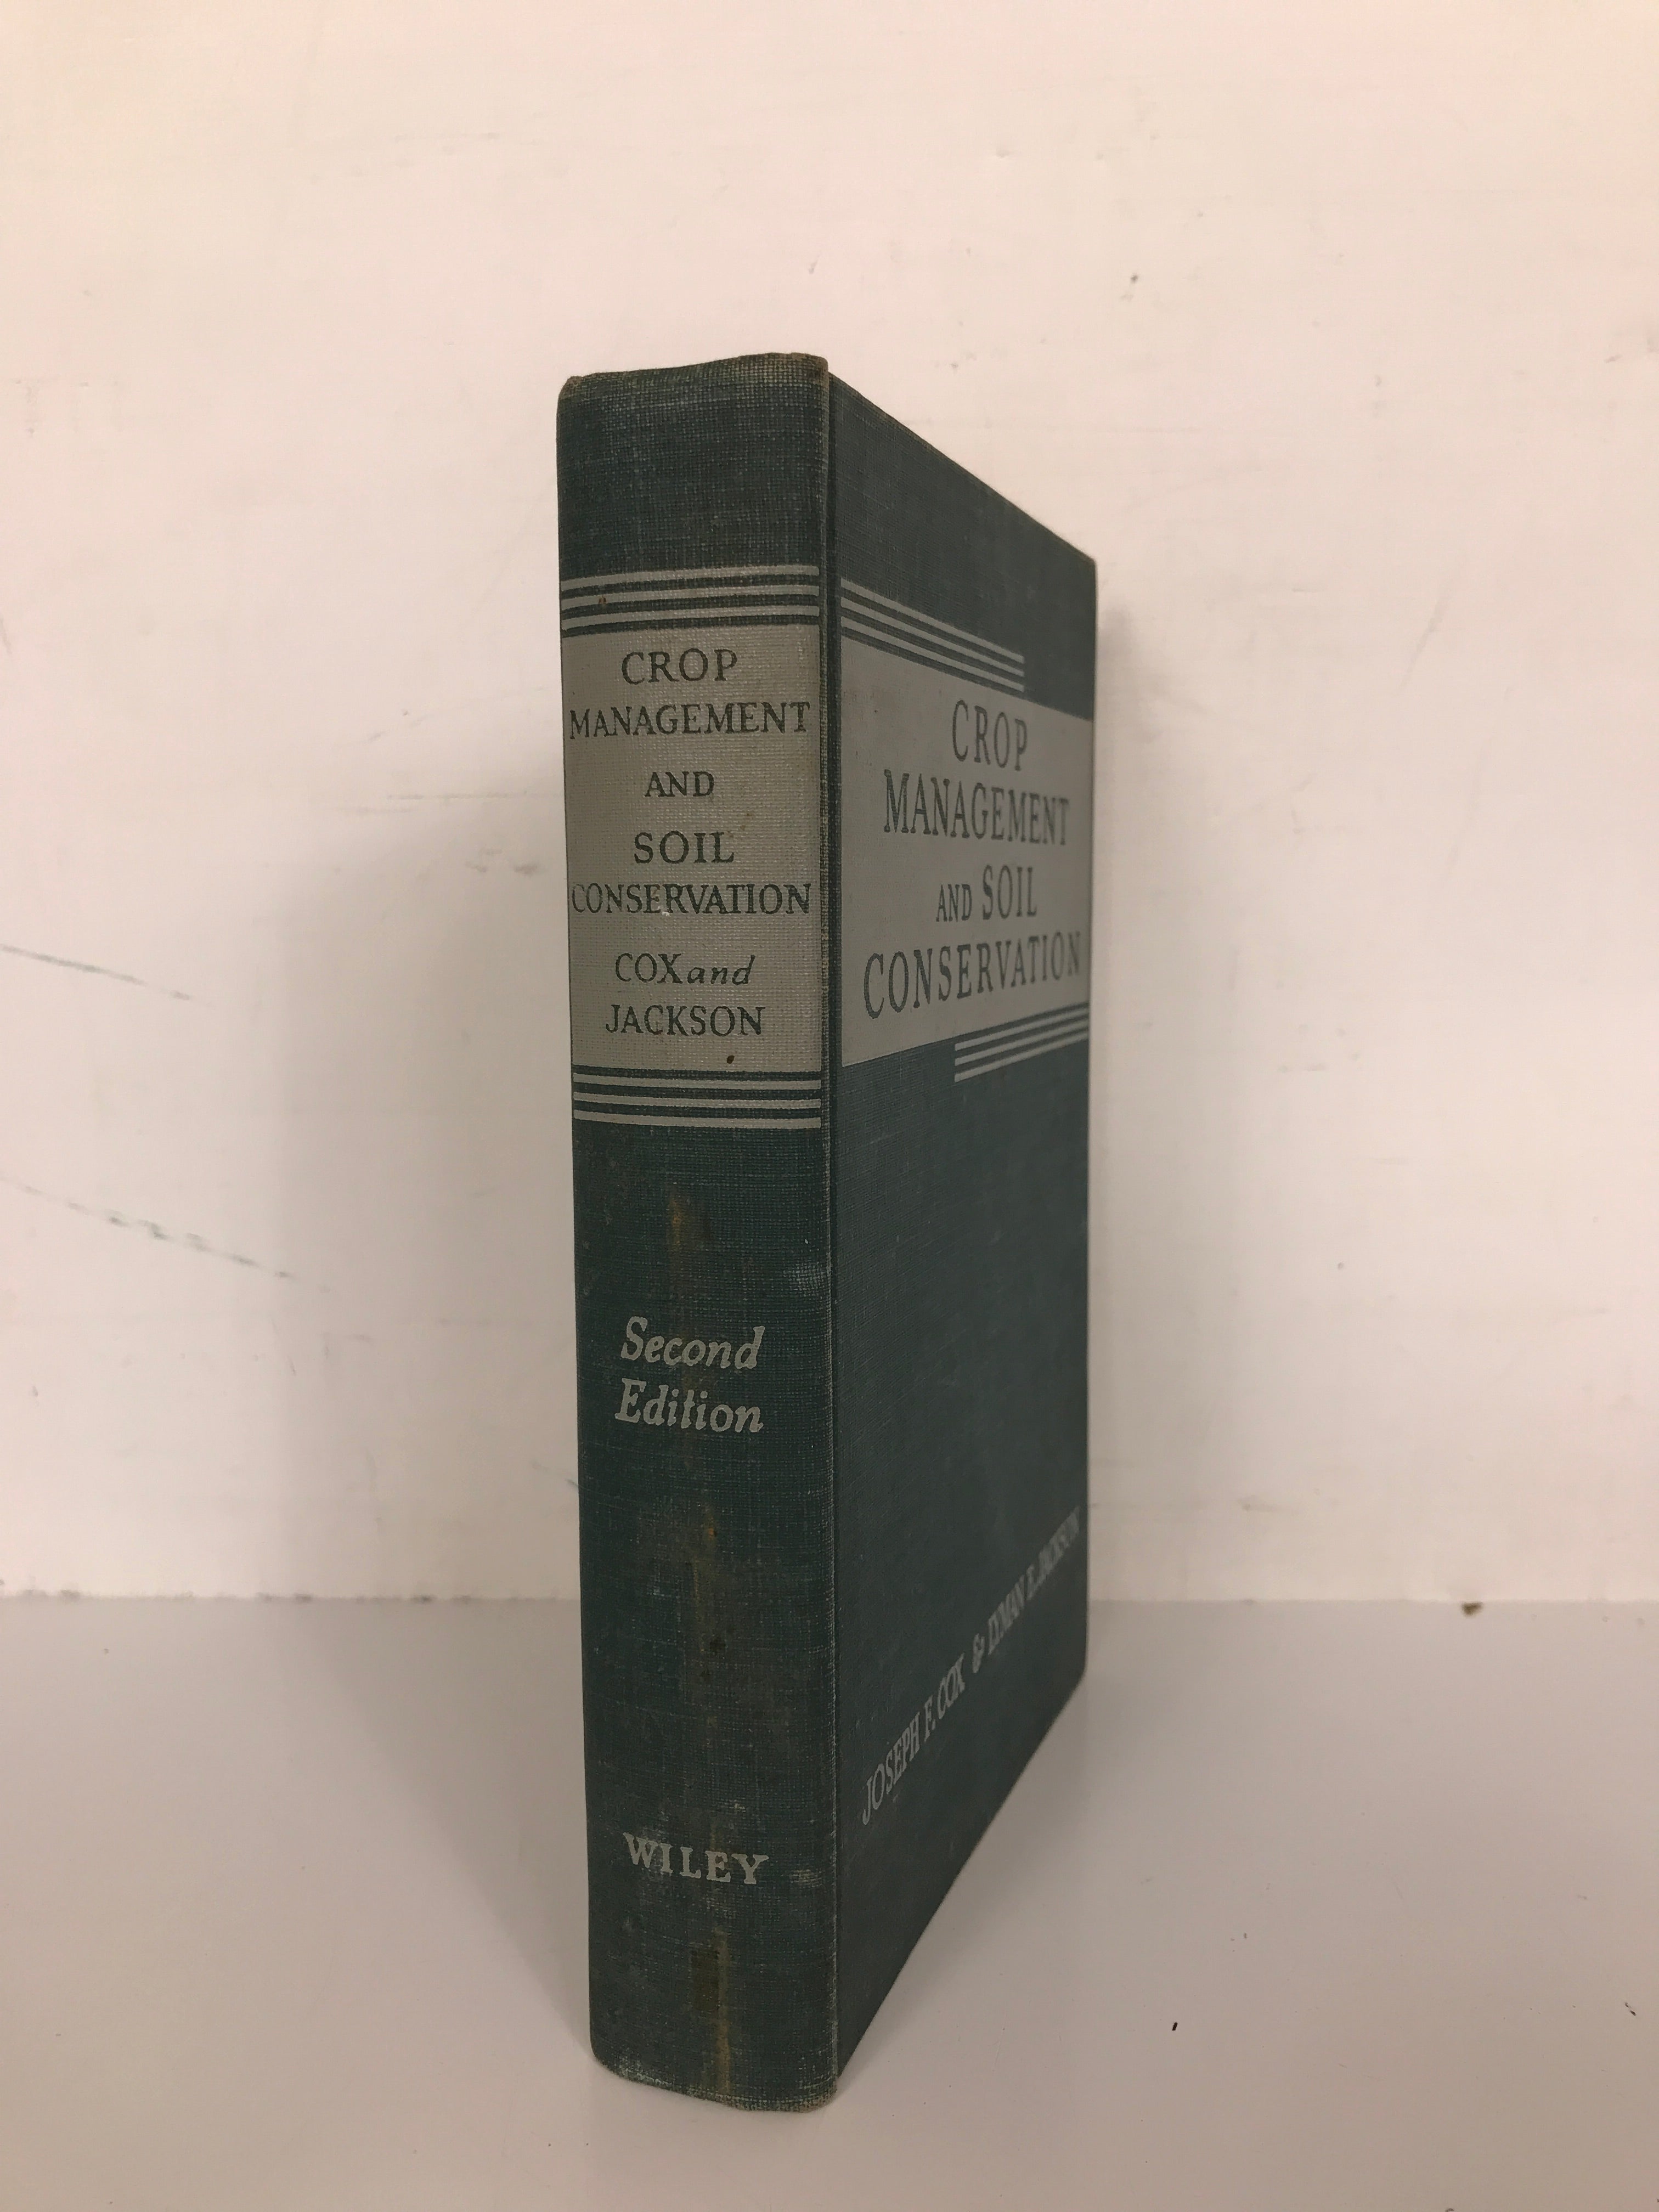 Crop Management and Soil Conservation by Cox and Jackson 1948 HC